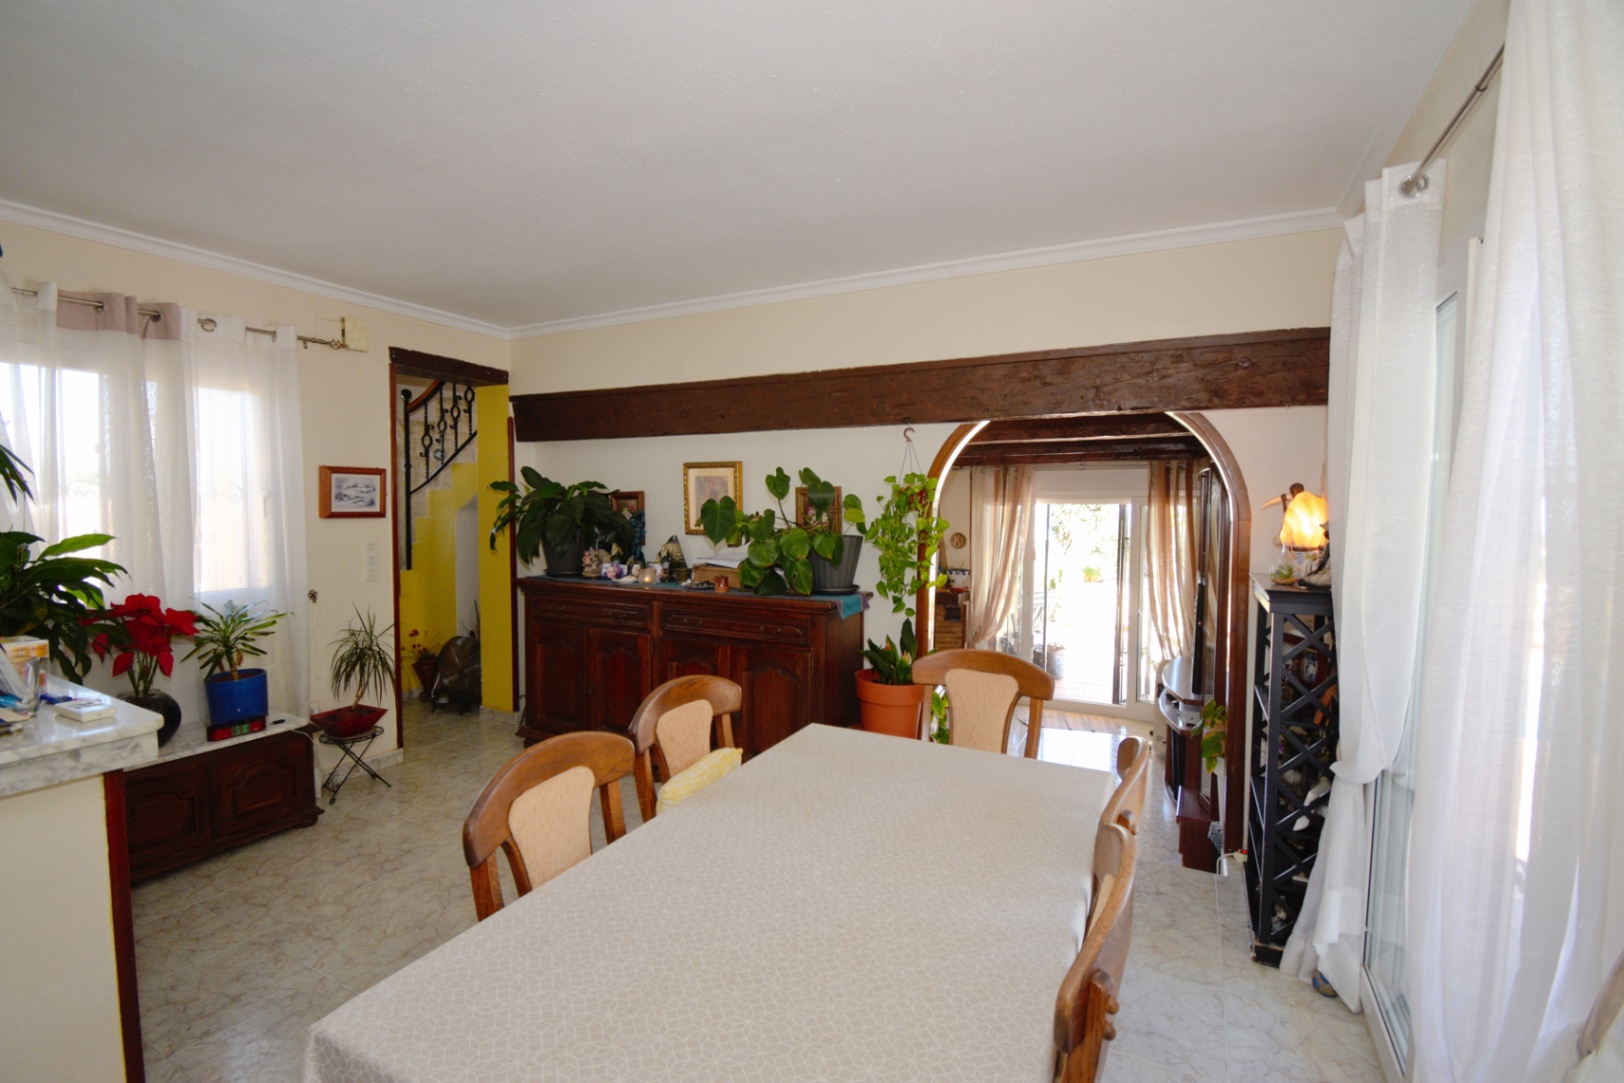 For Sale: Villa in Mongtó area